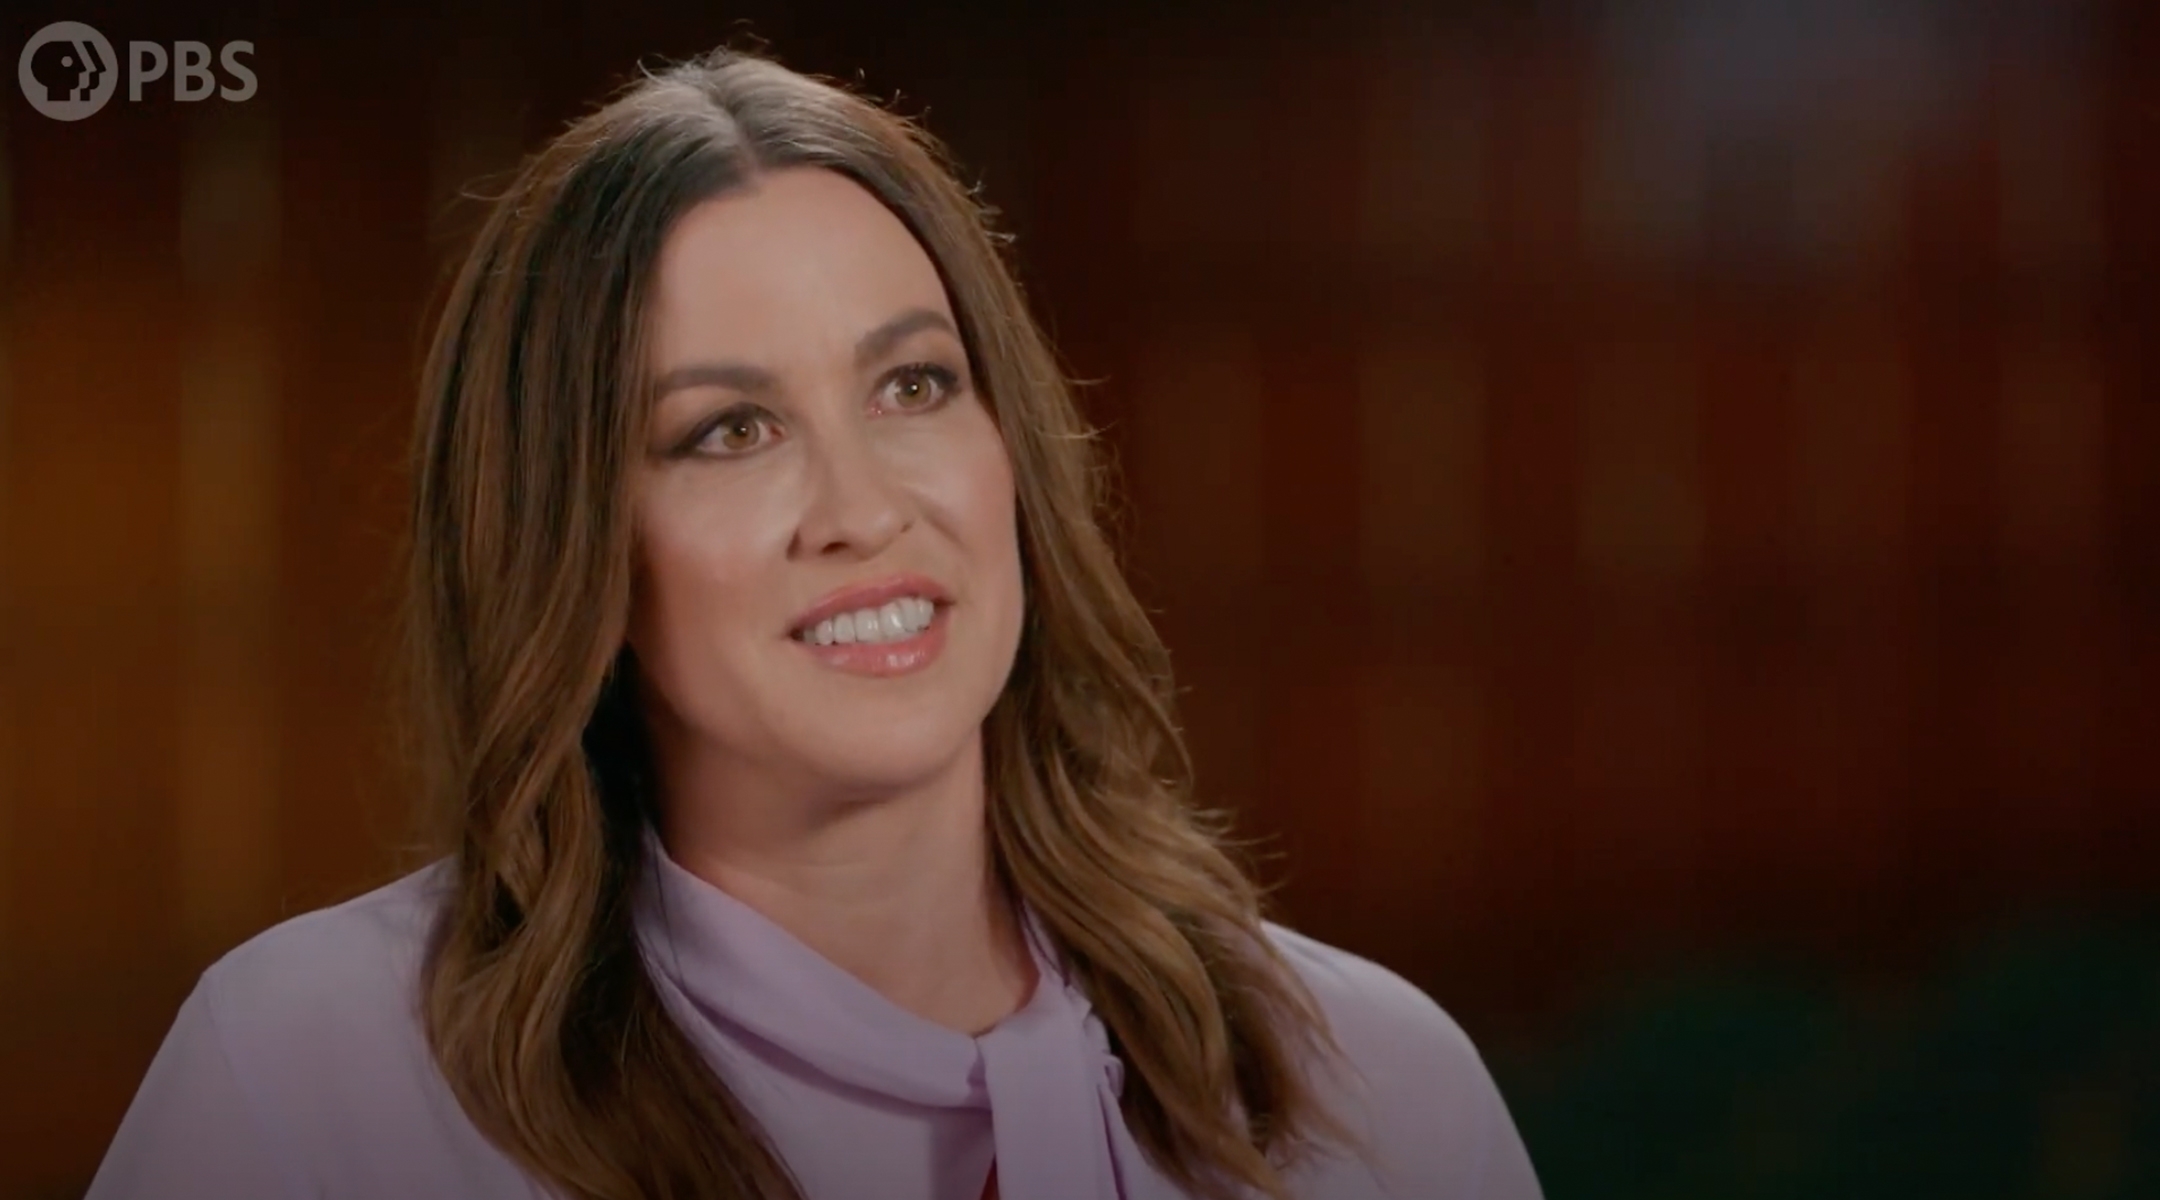 Alanis Morissette shown on PBS' celebrity genealogy series 'Finding Your Roots.' (Screenshot from YouTube)